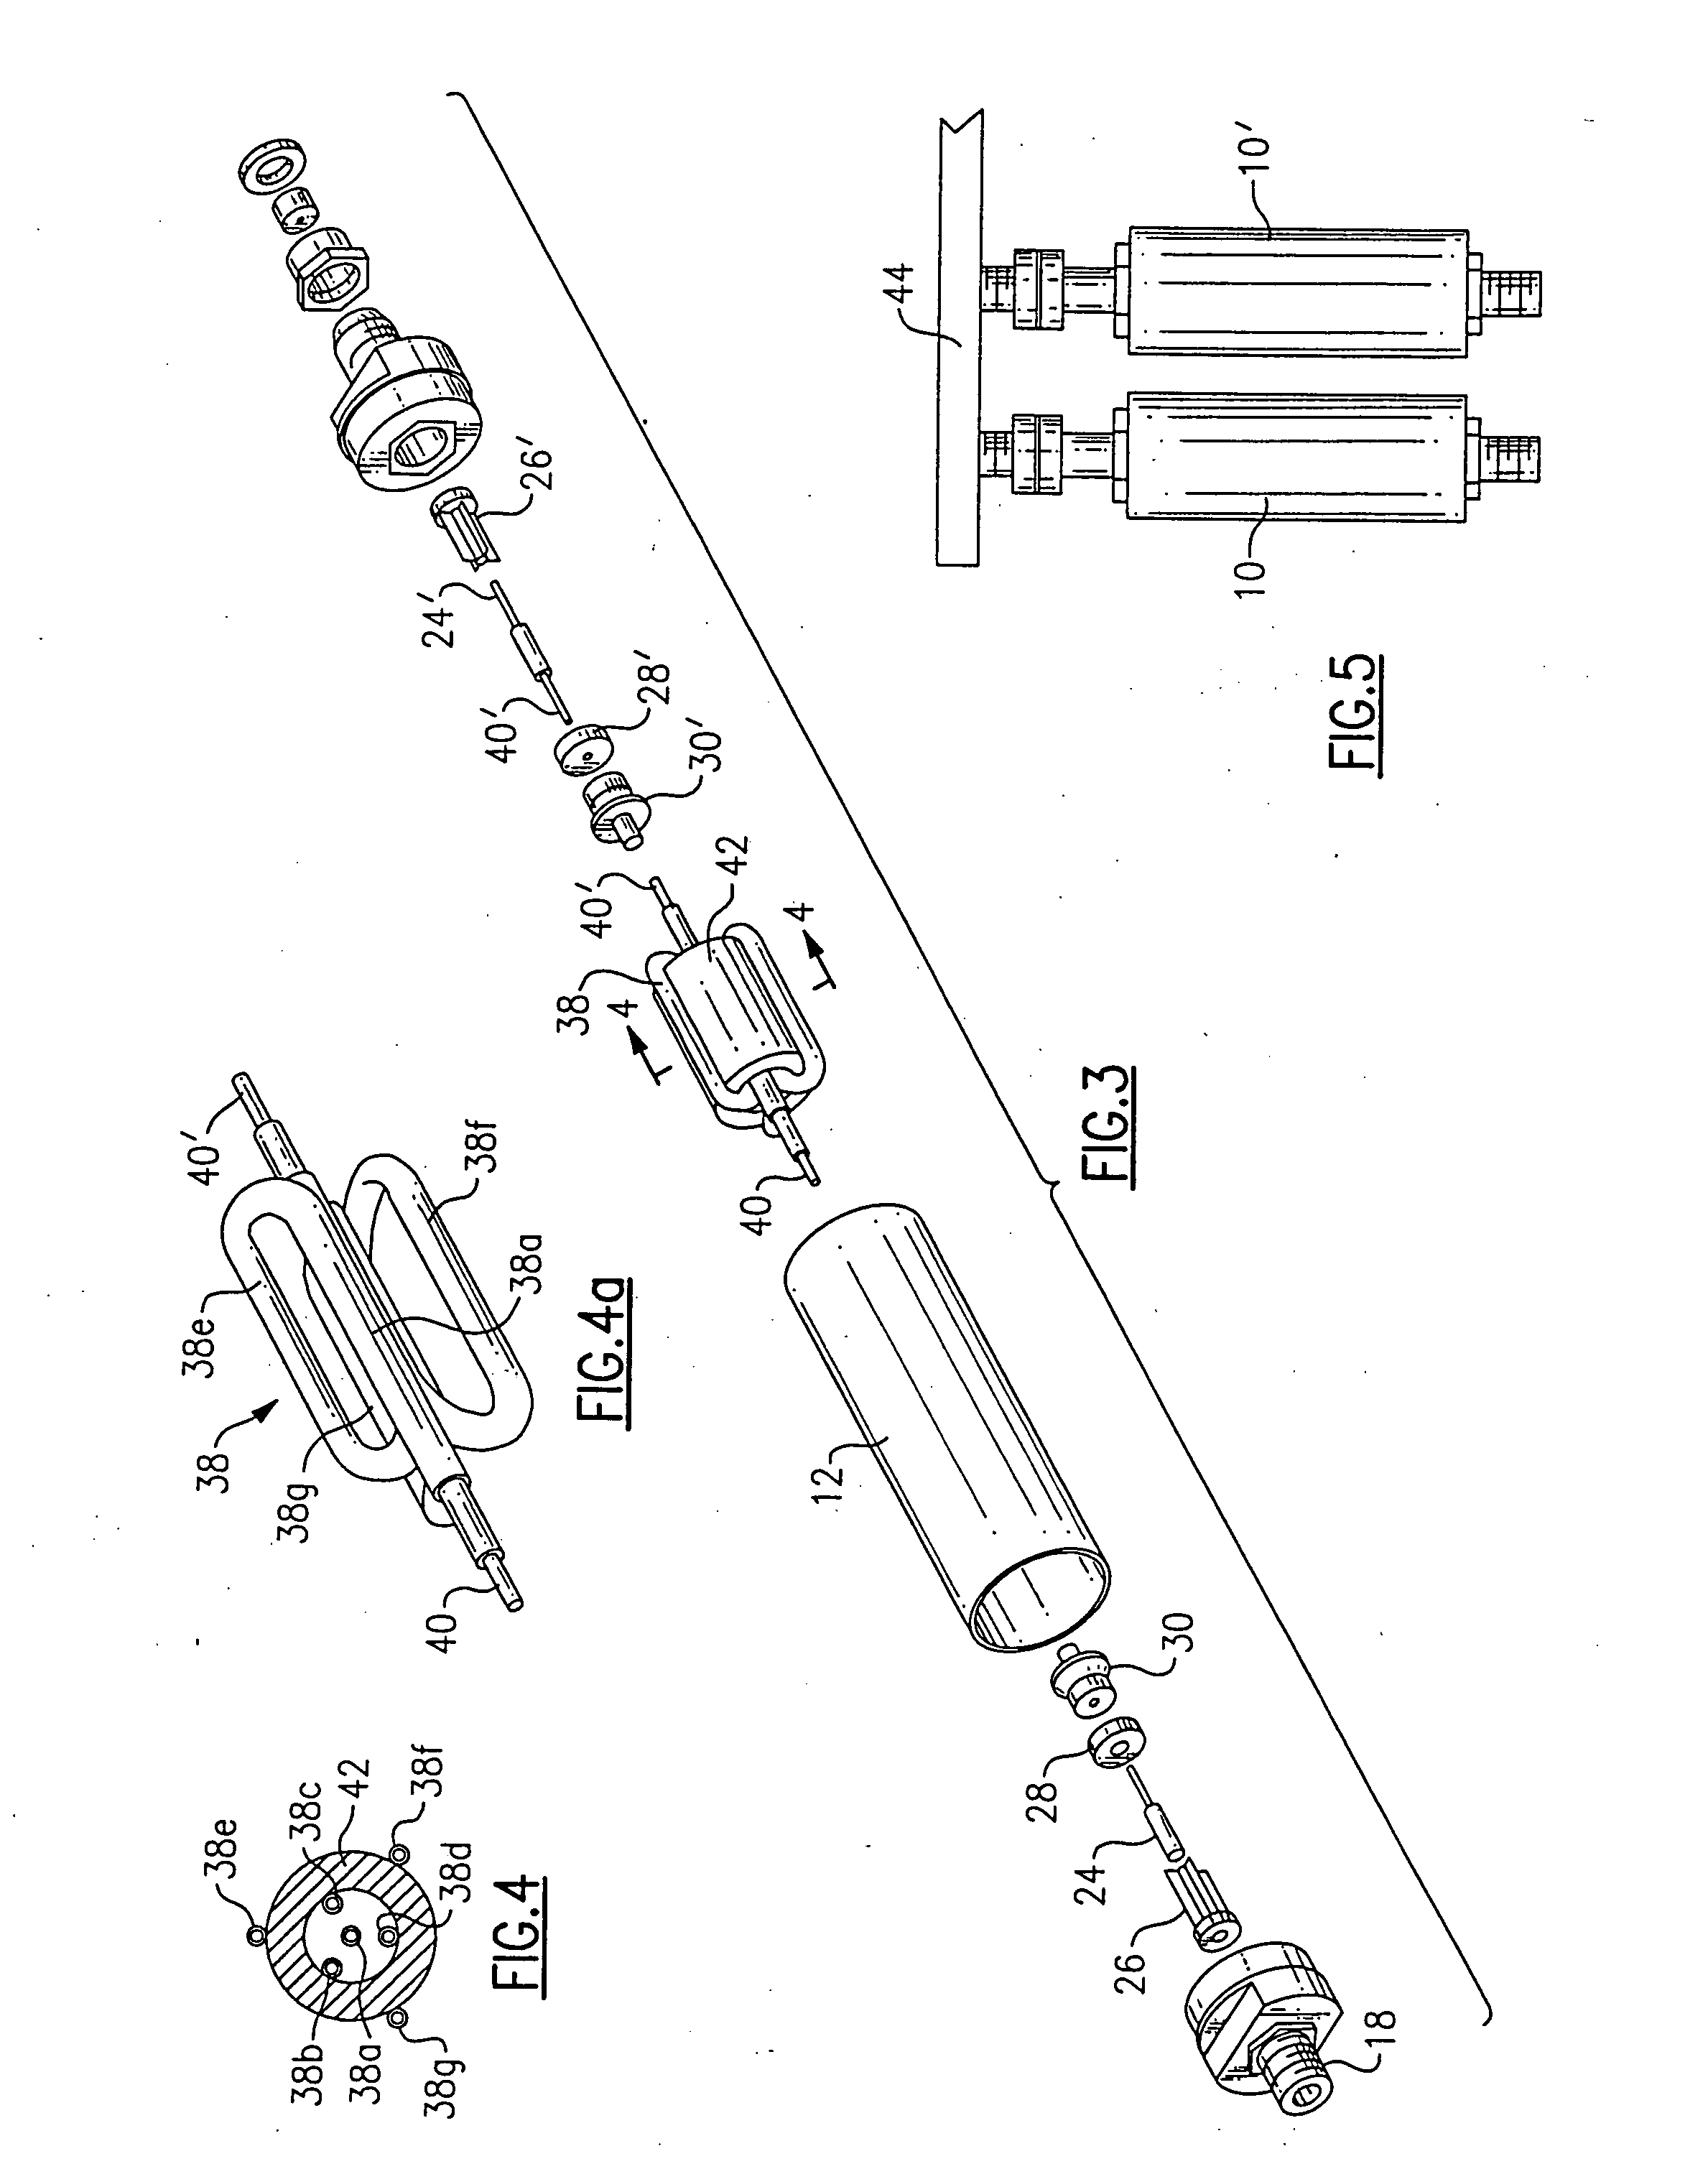 Sheath current attenuator for coaxial cable